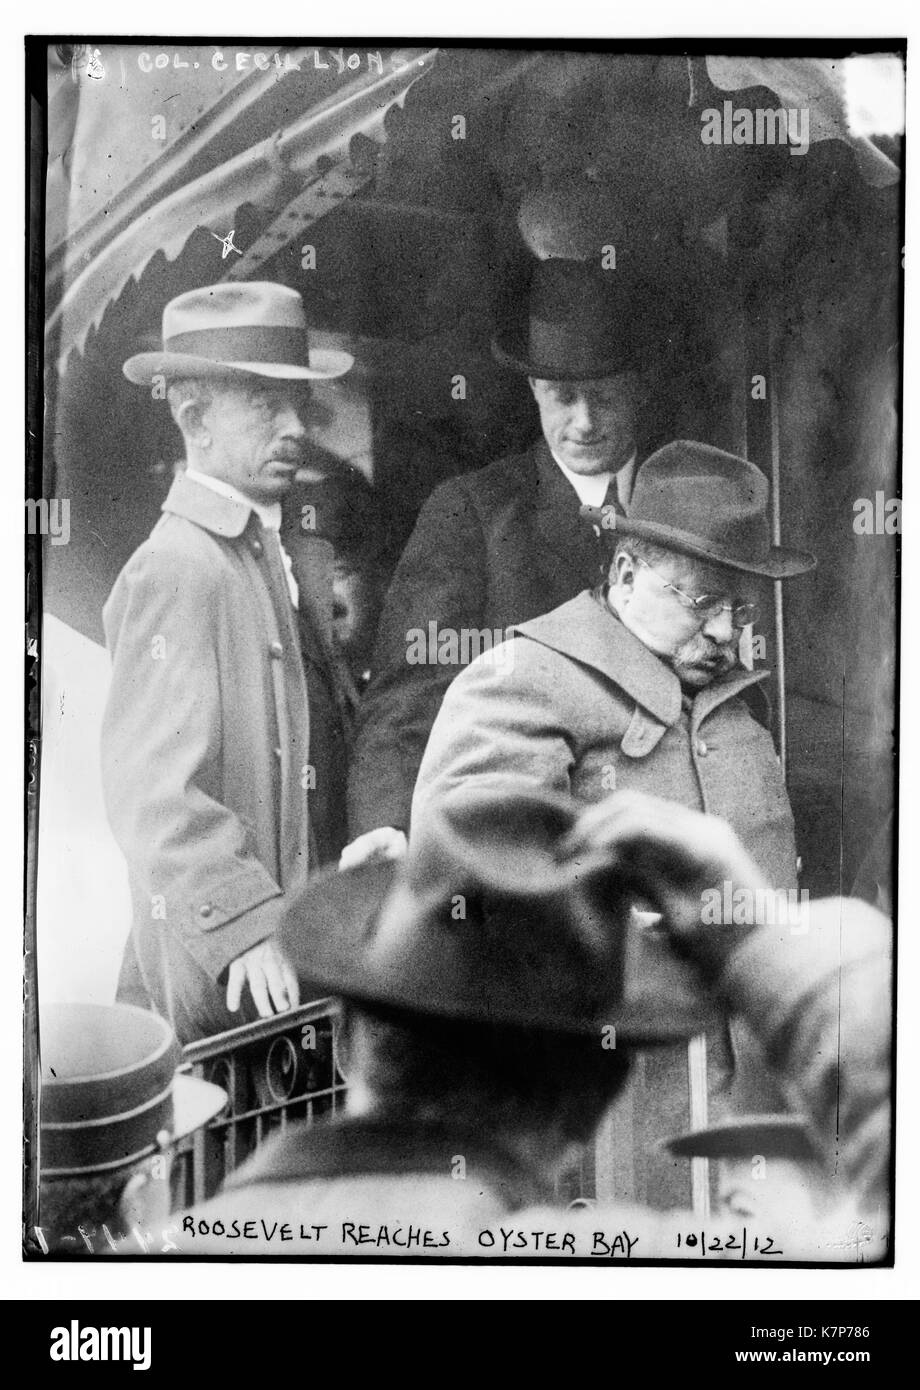 Photo shows President Teddy Roosevelt getting off a train at Oyster Bay, Long Island, following an assassination attempt by John F. Schrank. Col. Cecil Lyons is behind him on the train. 10/22/12. Stock Photo